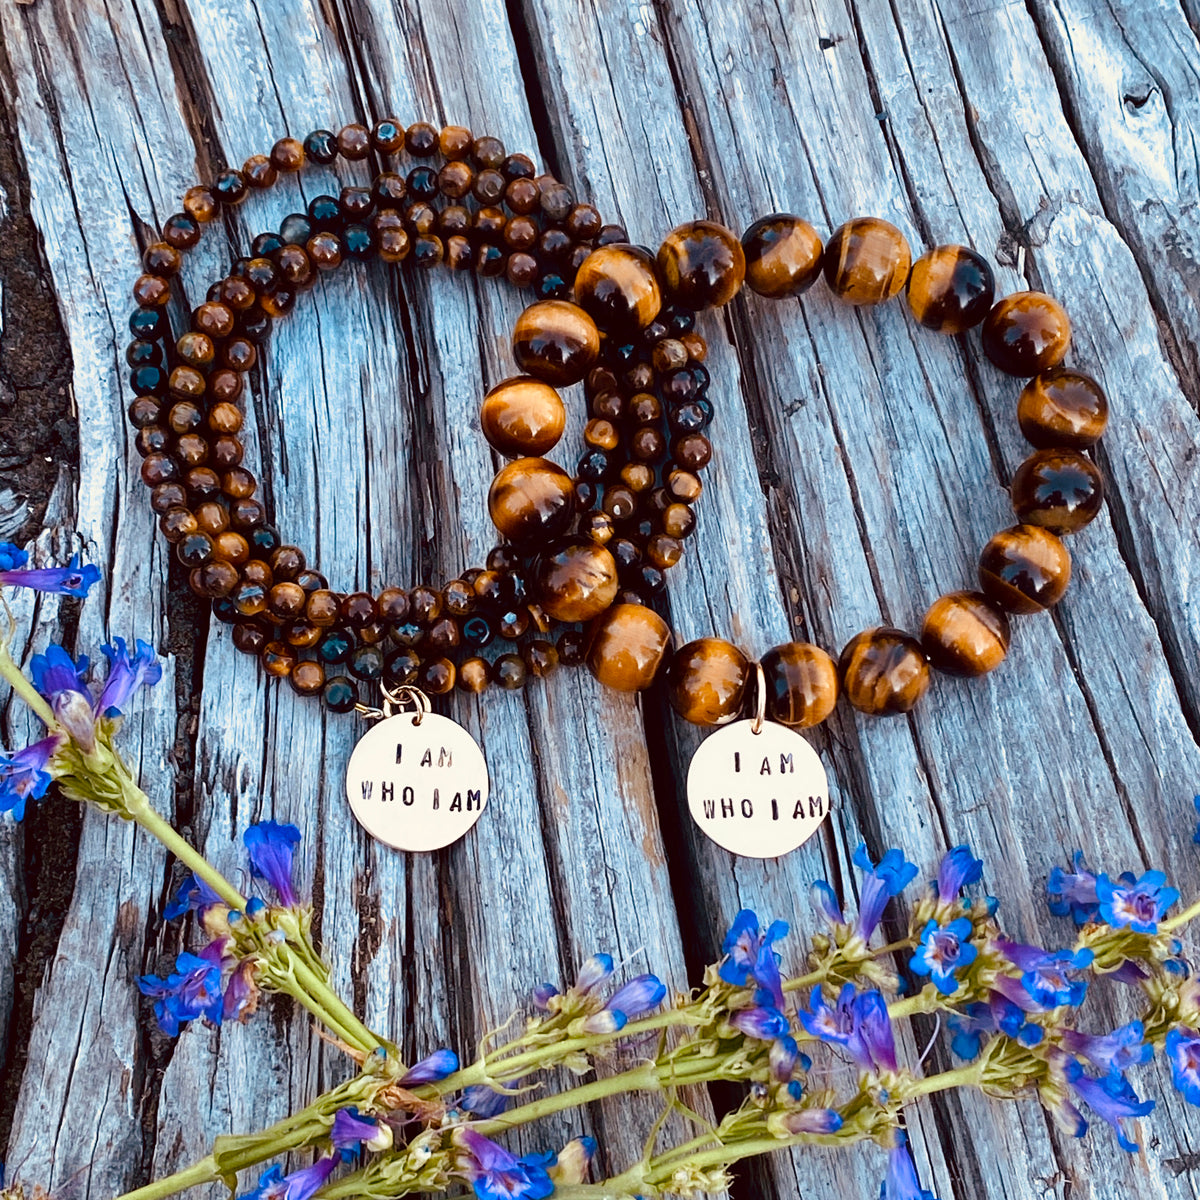 o I am - Affirmation Bracelet with Tiger Eye. To be yourself in a world that is constantly trying to make you something else is the greatest accomplishment.